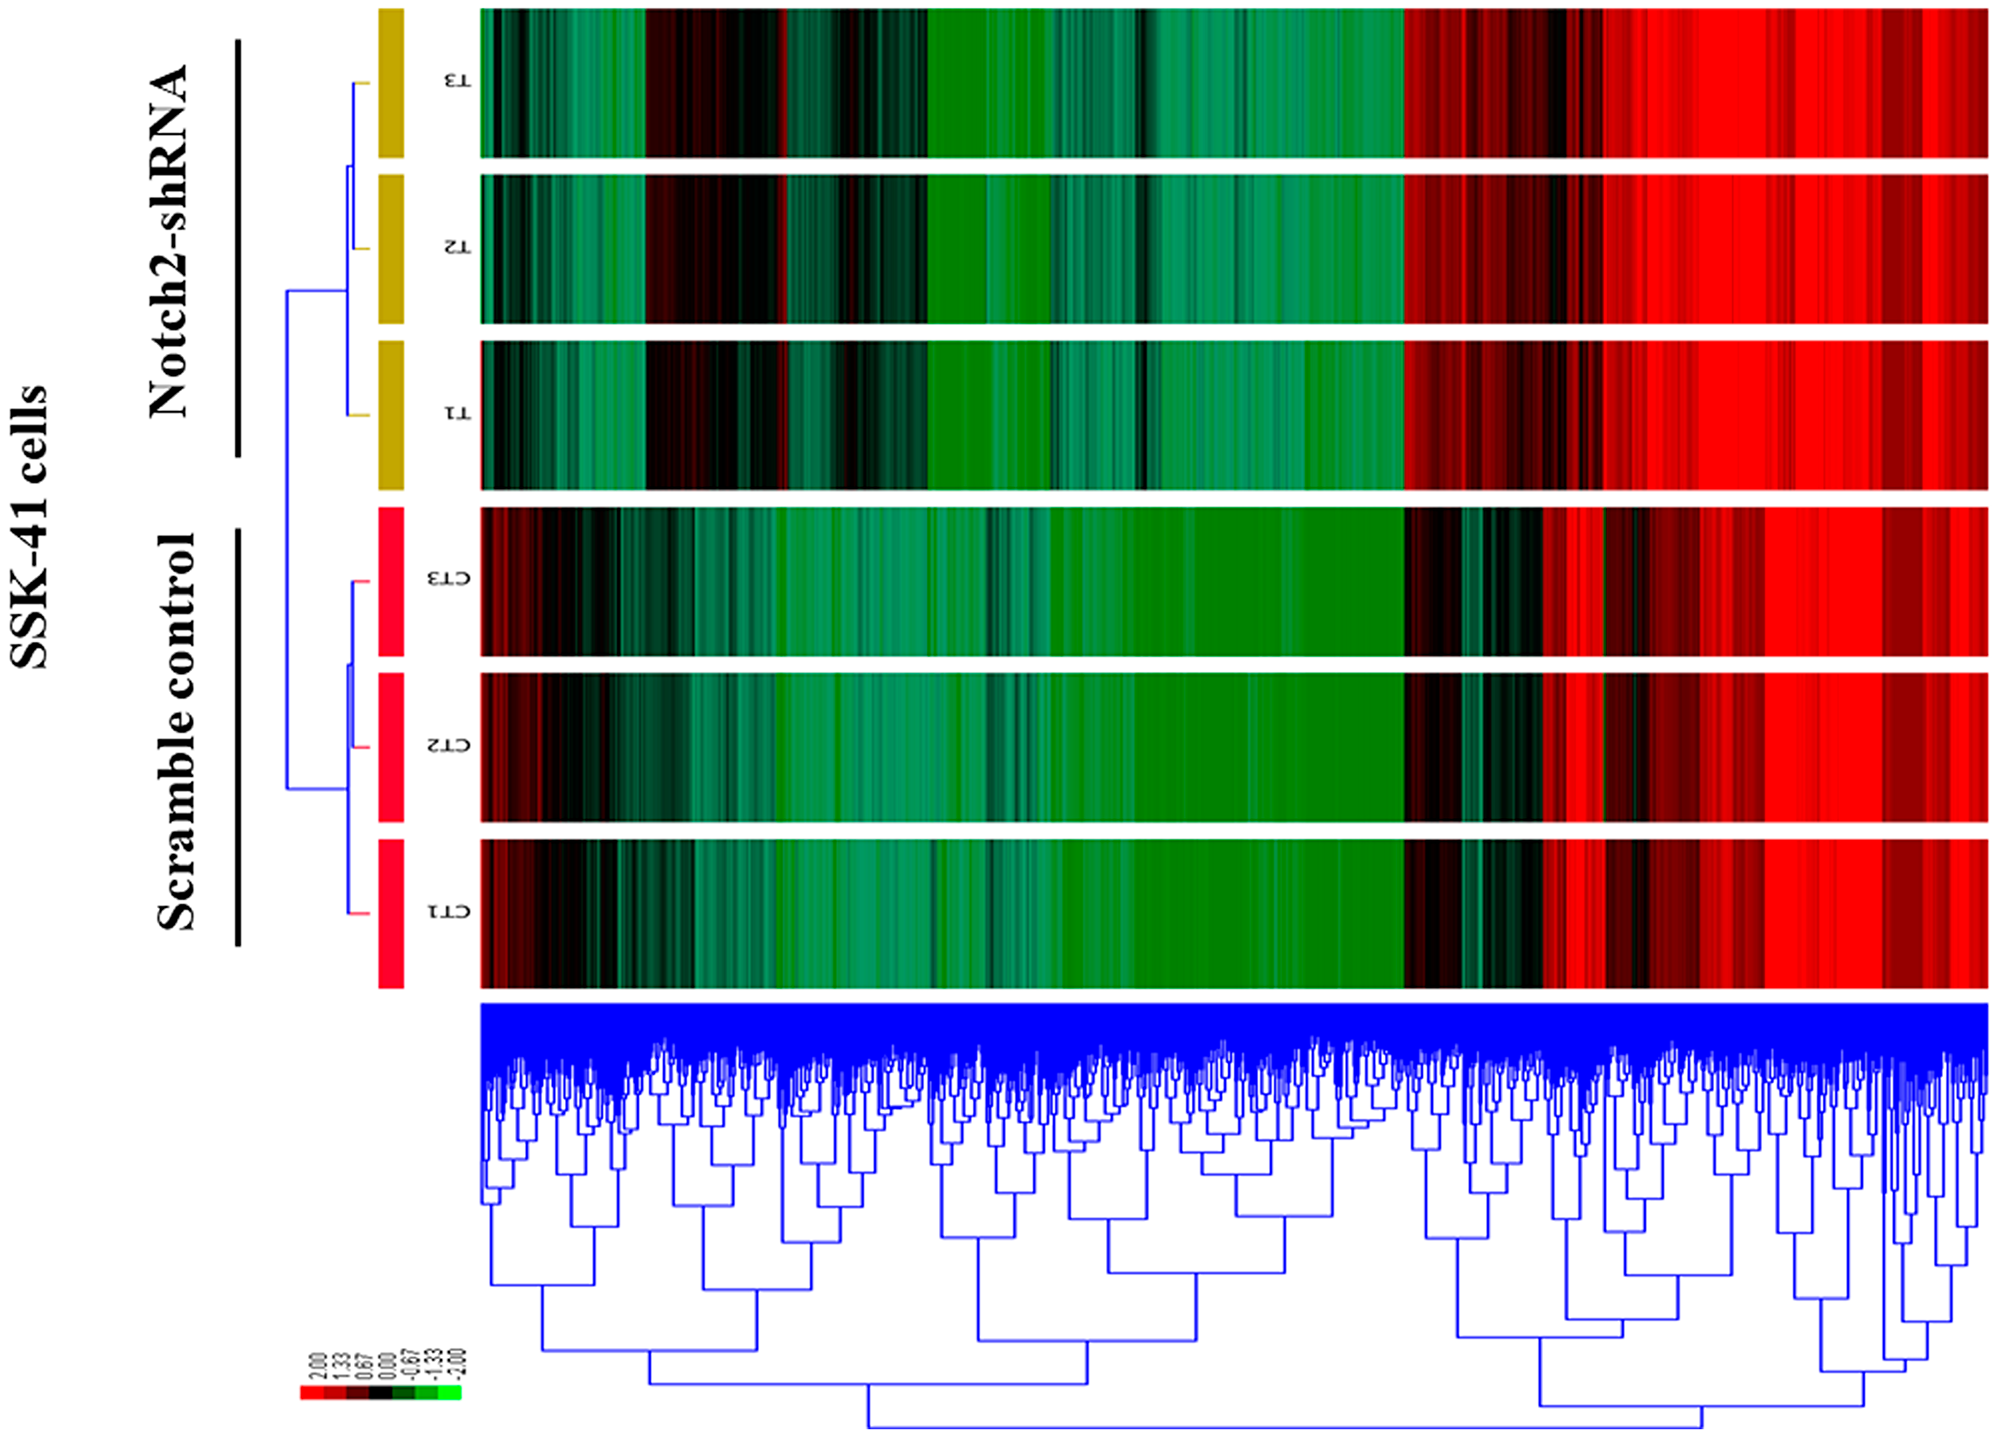 A clustered heat map showing the expression patterns of DEGs in control and Notch2-shRNA treated SSK-41 cells.